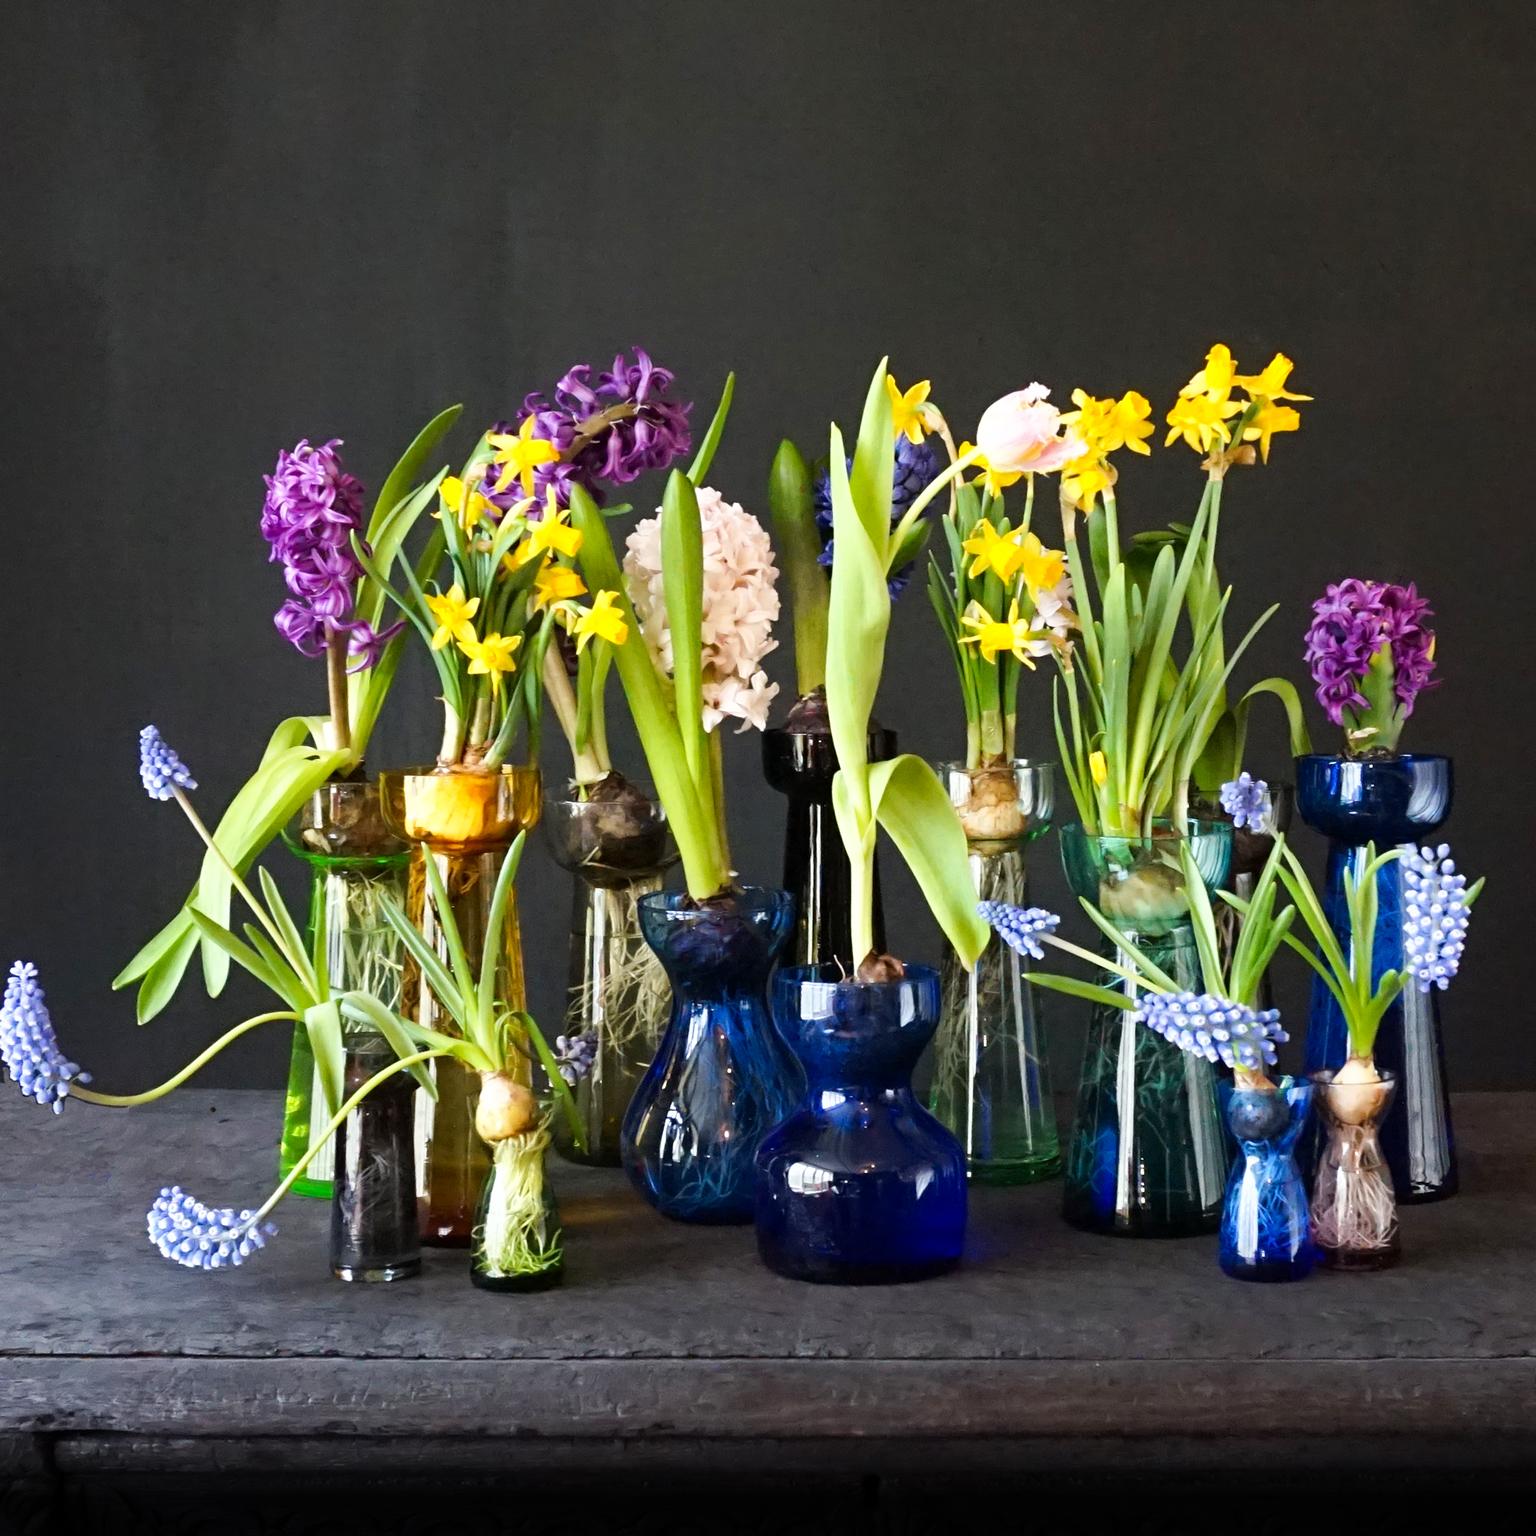 14 large 1950s-1960s flower bulb hyacinth, daffodil, tulip and crocus vases.
All clear blown glass by Leerdam for Rimac Baarn. 
Two of the greenish yellow ones are actually vaseline (or uranium) glass.

Purple 'Jolly' 21cm high, Ø 7cm